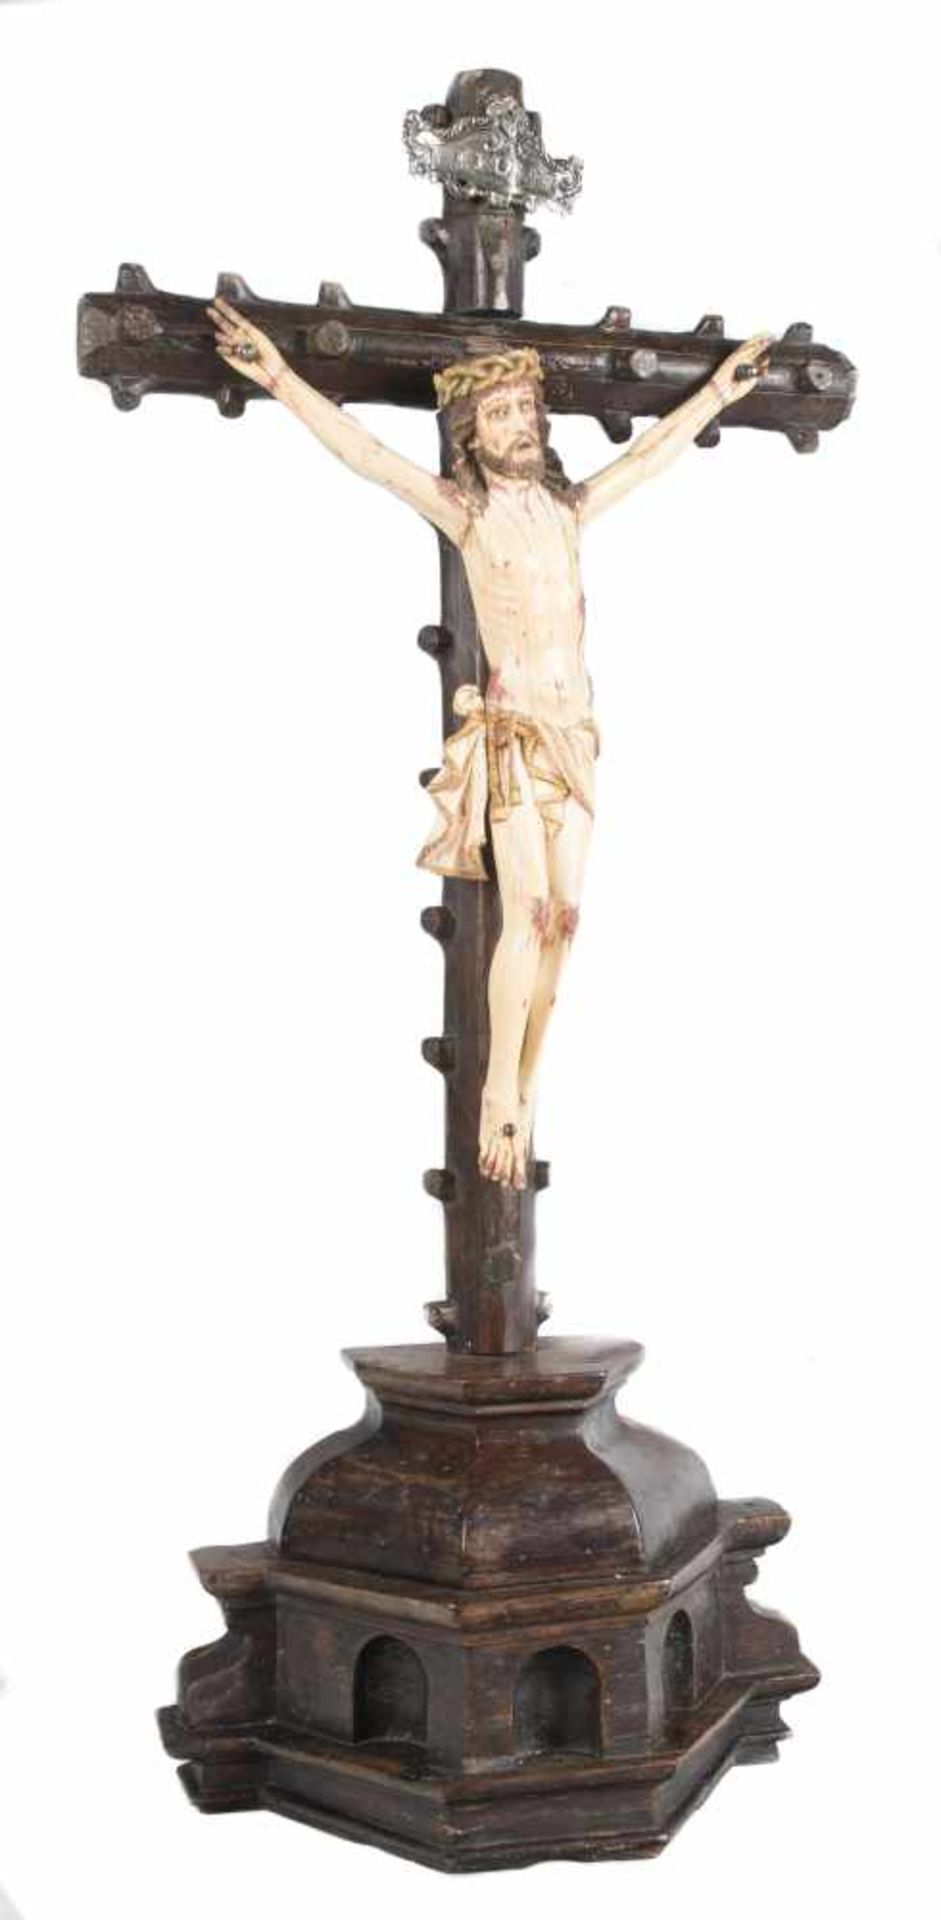 "Crucifix". Sculpted and polychromed ivory figure. Indo-Portuguese School. 17th century.